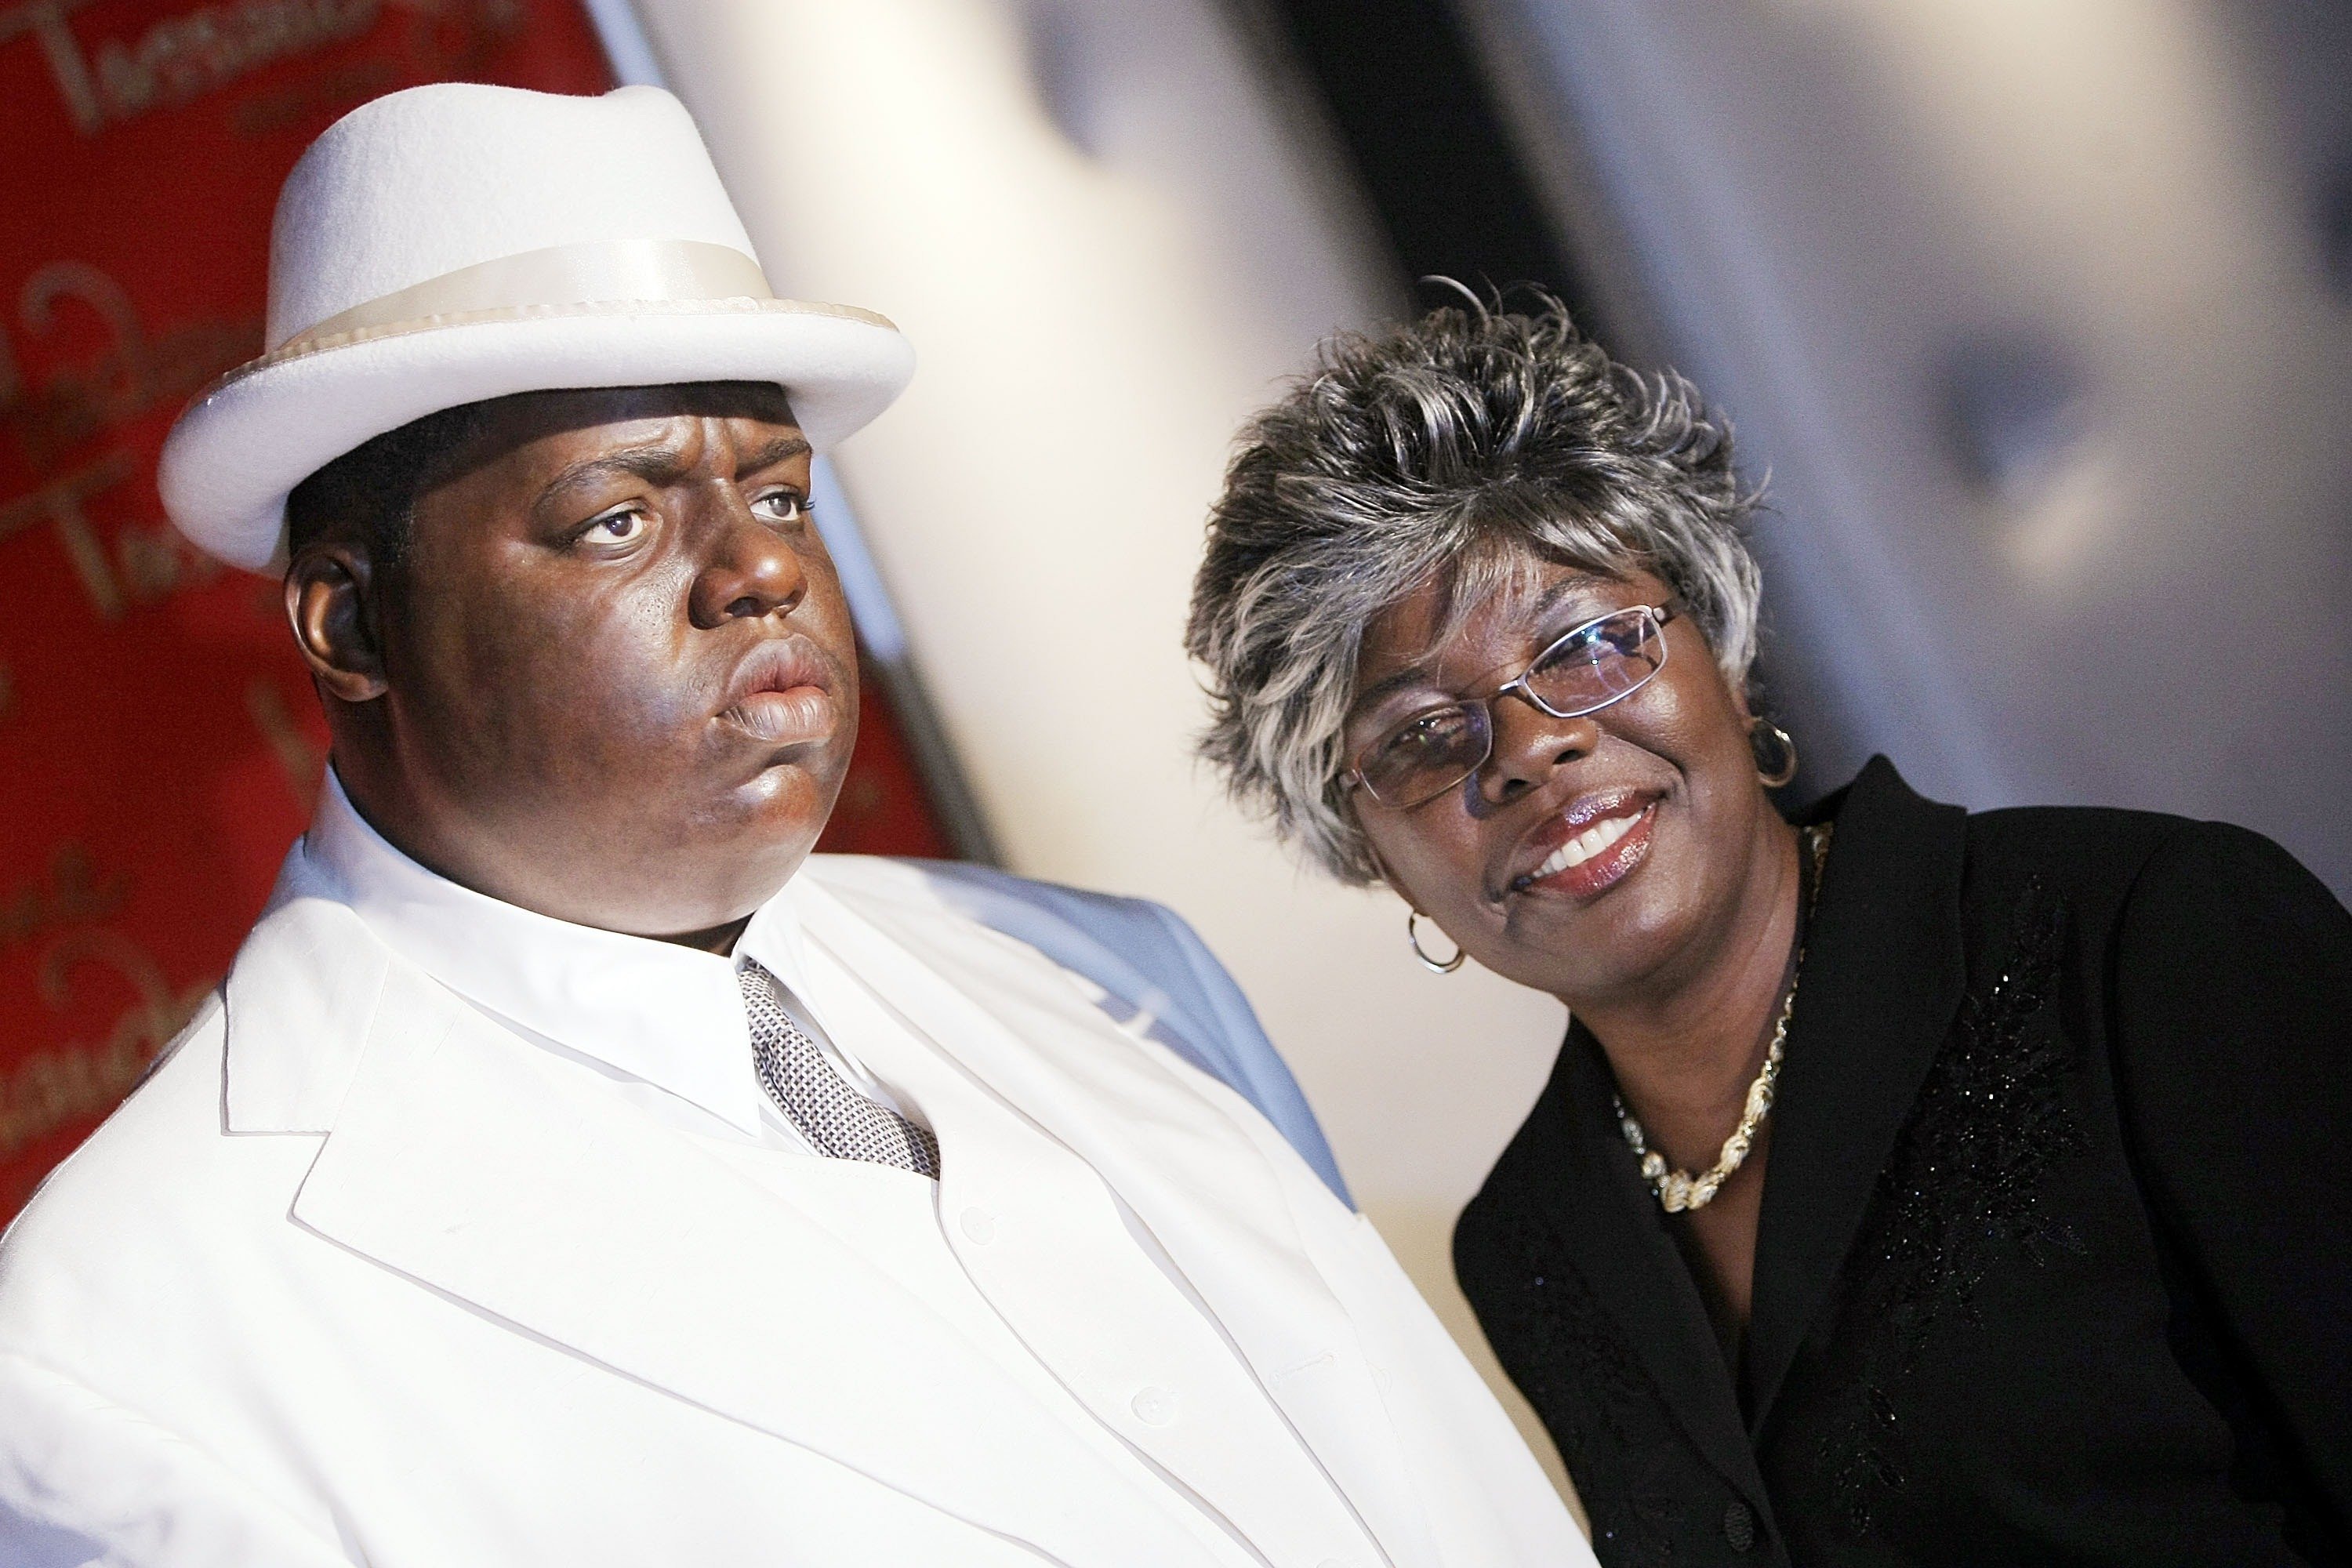 Voletta Wallace poses for a photo with a wax figure of her son Christopher 'Biggie Smalls' Wallace